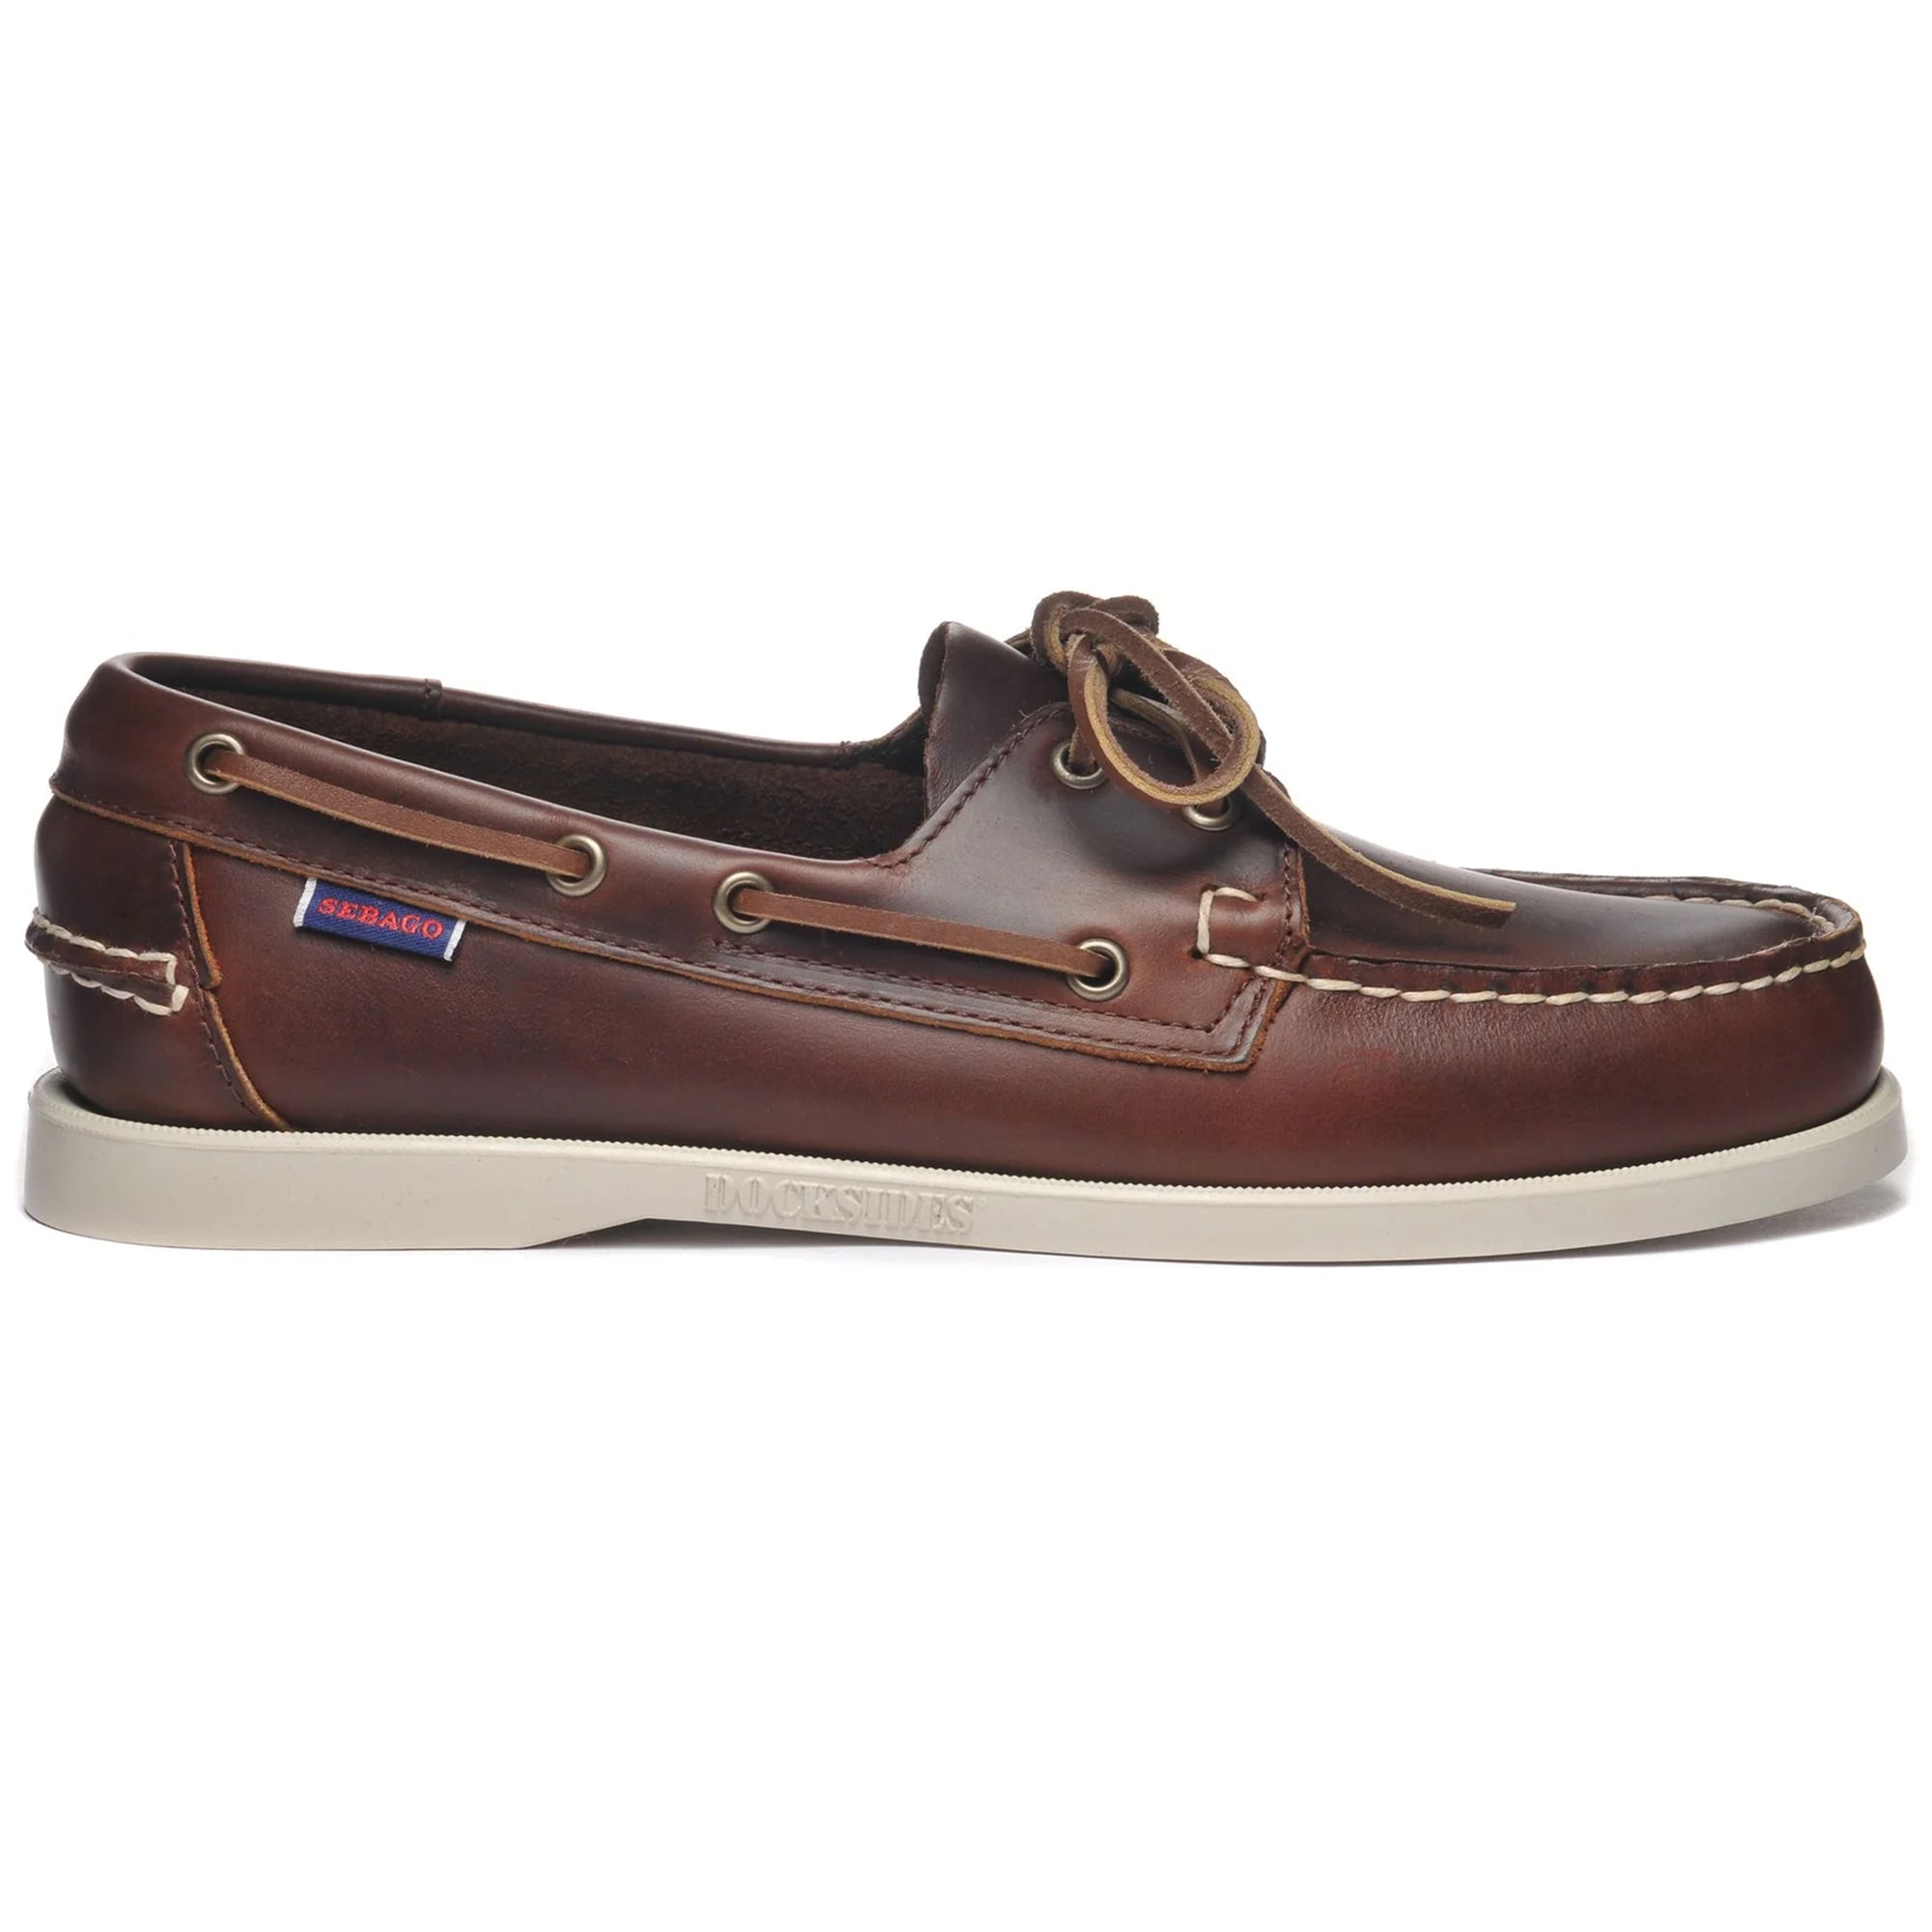 Sebago Docksides Portland Waxed Leather Boat Shoes - Brown / White